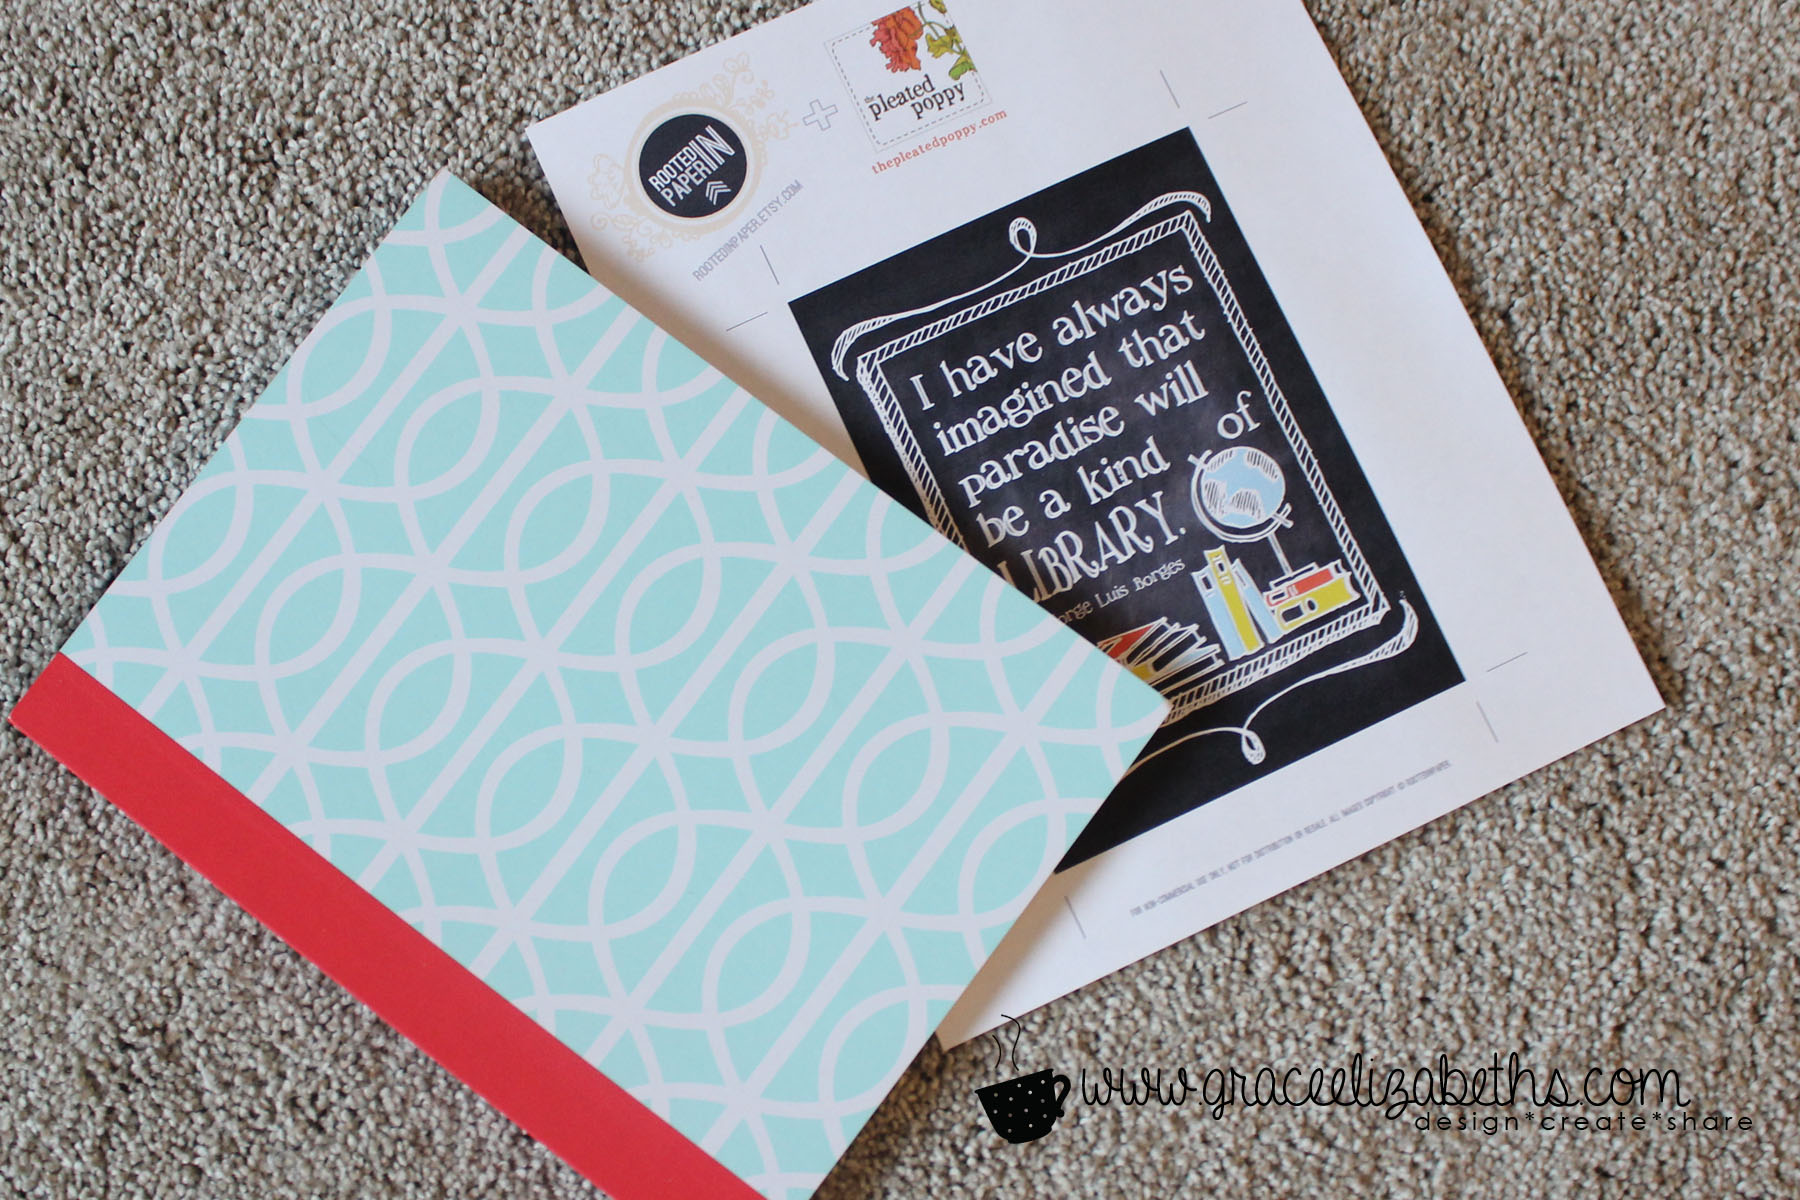 How to encourage reading and make it more fun with a DIY reading journal  for kids – Playful Notes